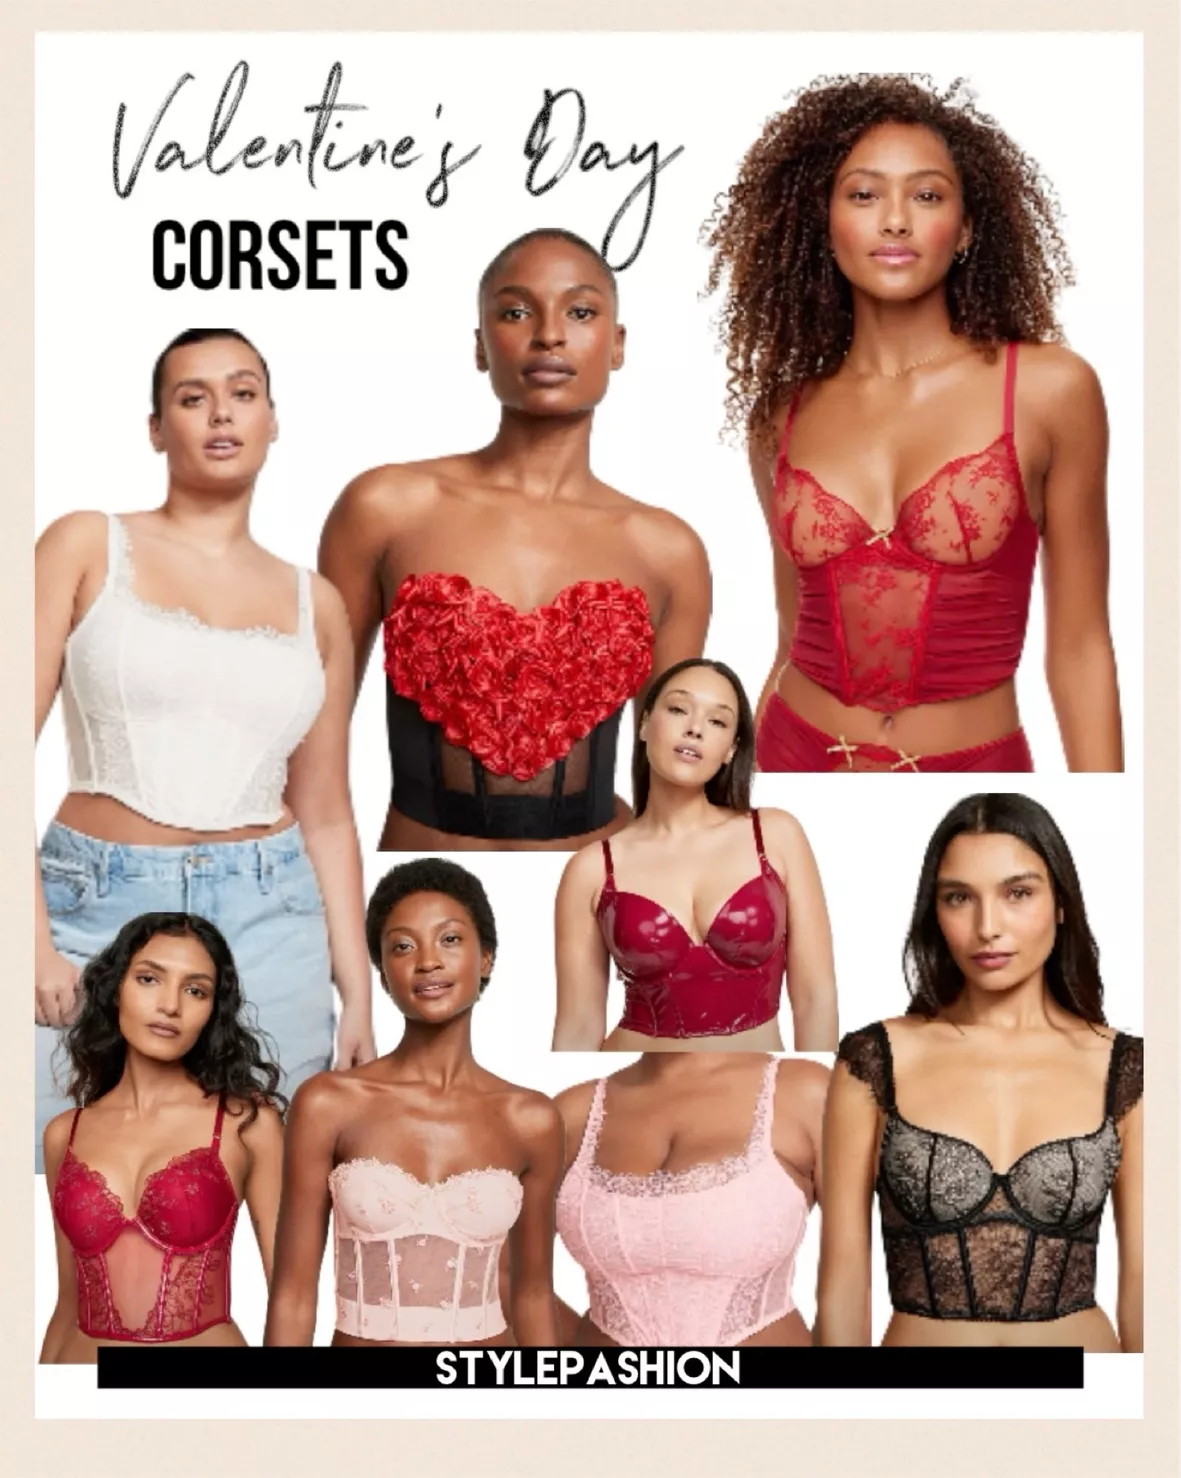 Lace bralette - Women curated on LTK